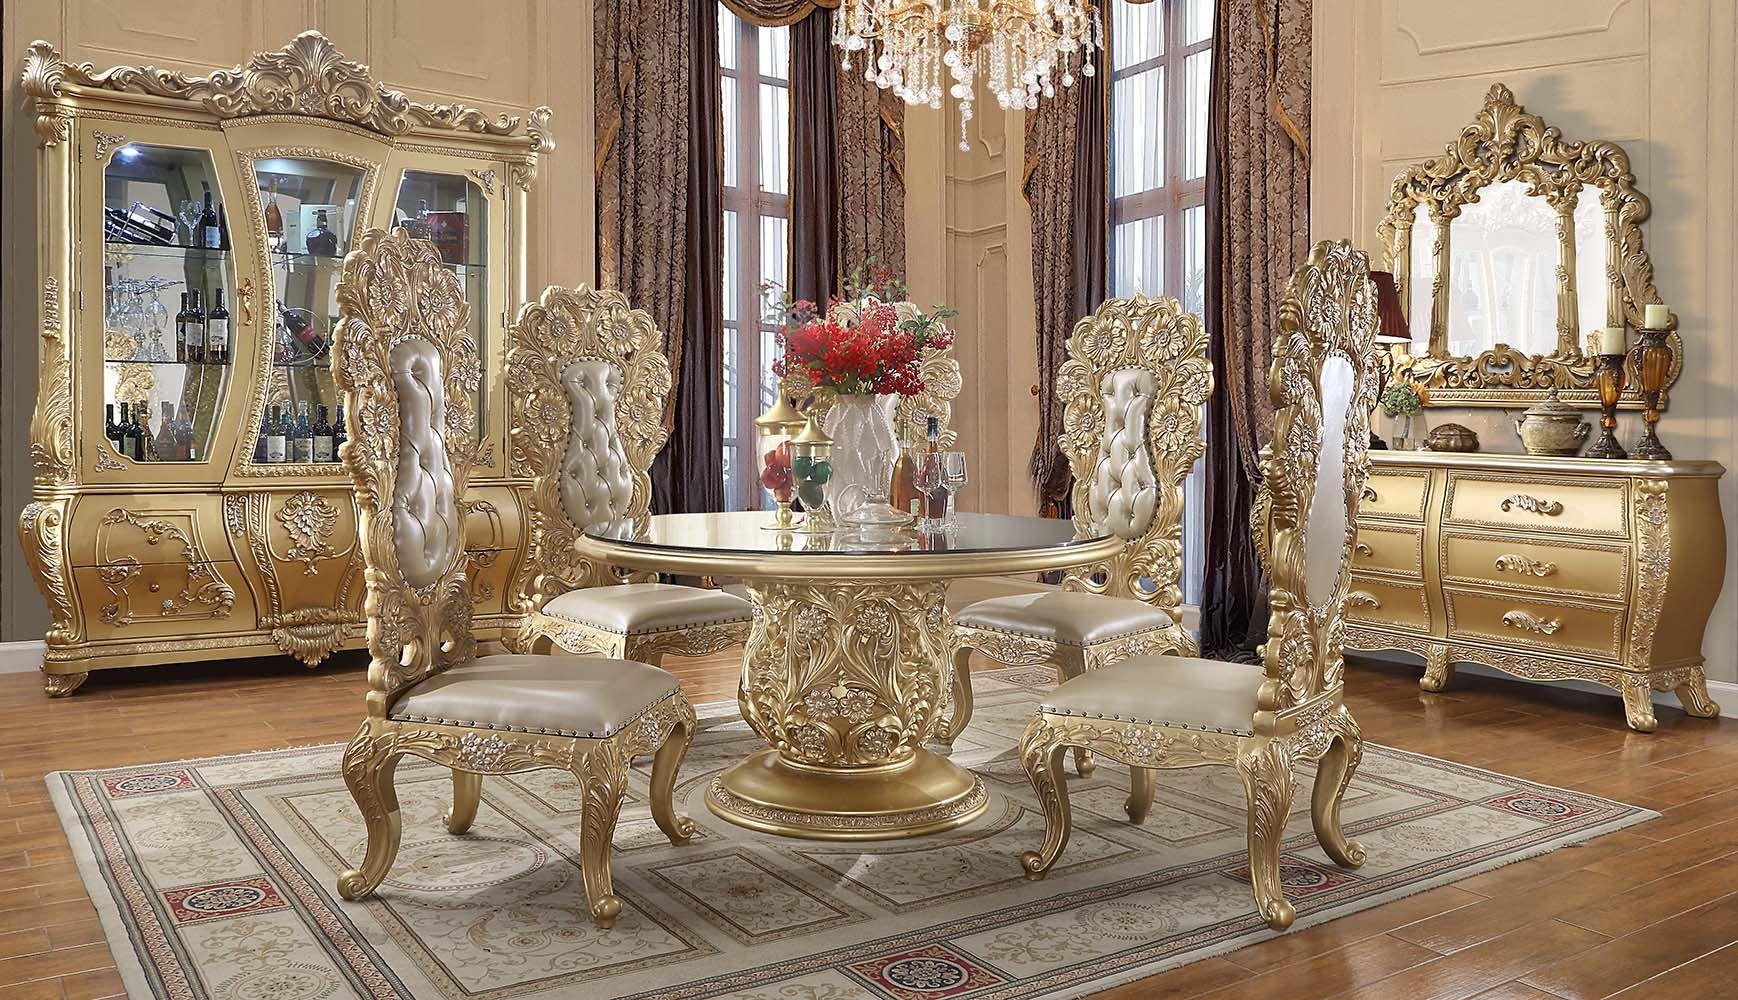 Classic Dining Room Set Cabriole Round Dining Room Set 9PCS DN01481-RT-9PCS DN01481-RT-9PCS in Gold PU